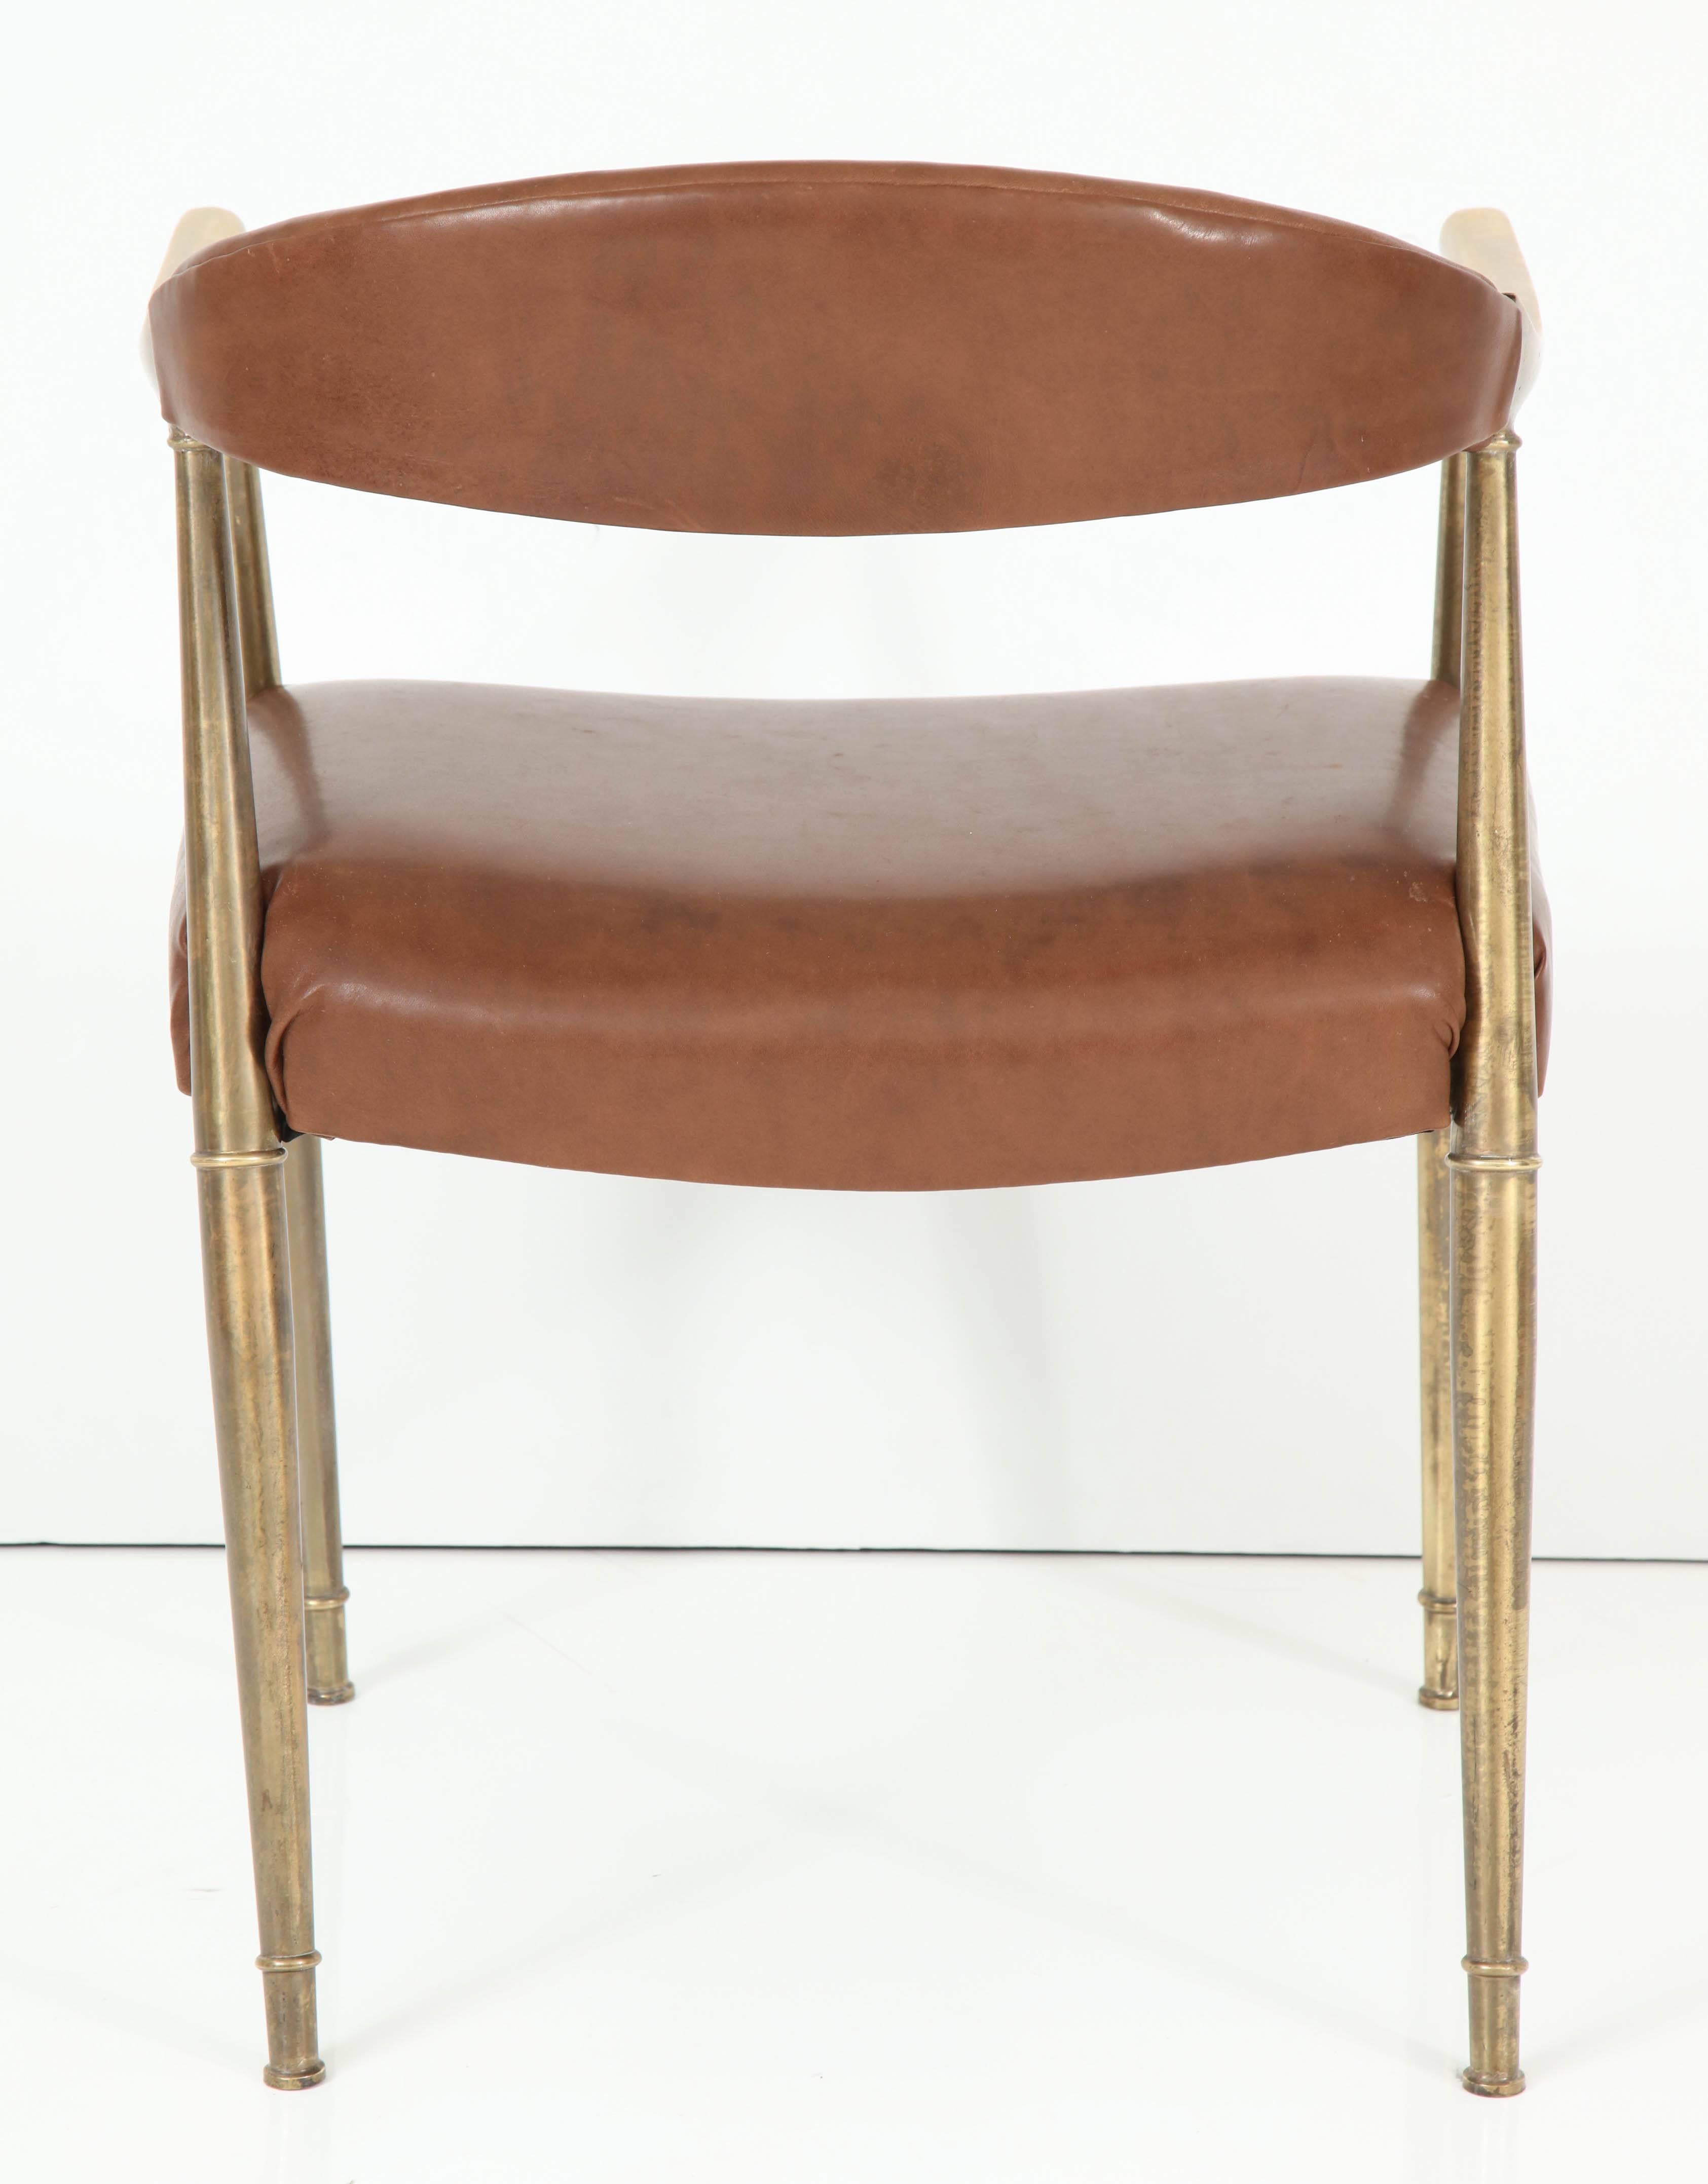 Italian Brass Armchair in Saddle Leather For Sale 3